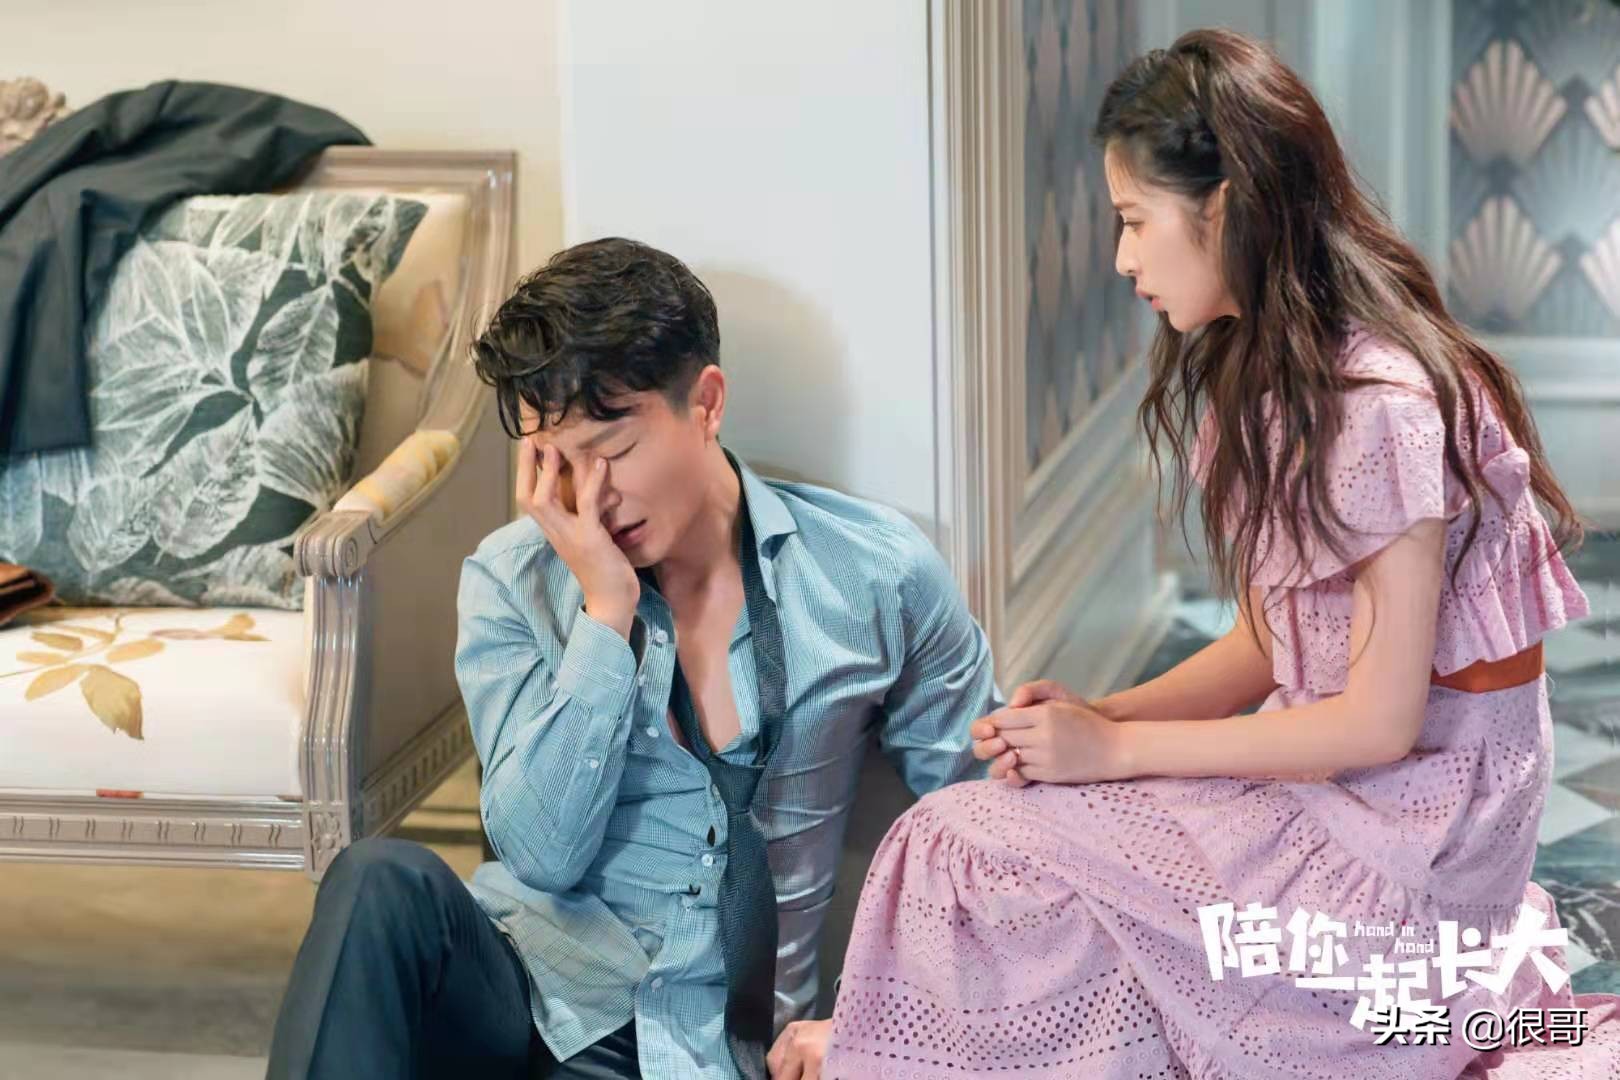 Clever piece act " accompany you to be brought up together " , popular feeling lets ache in drama, play tegument husband bestowed favor on a princess